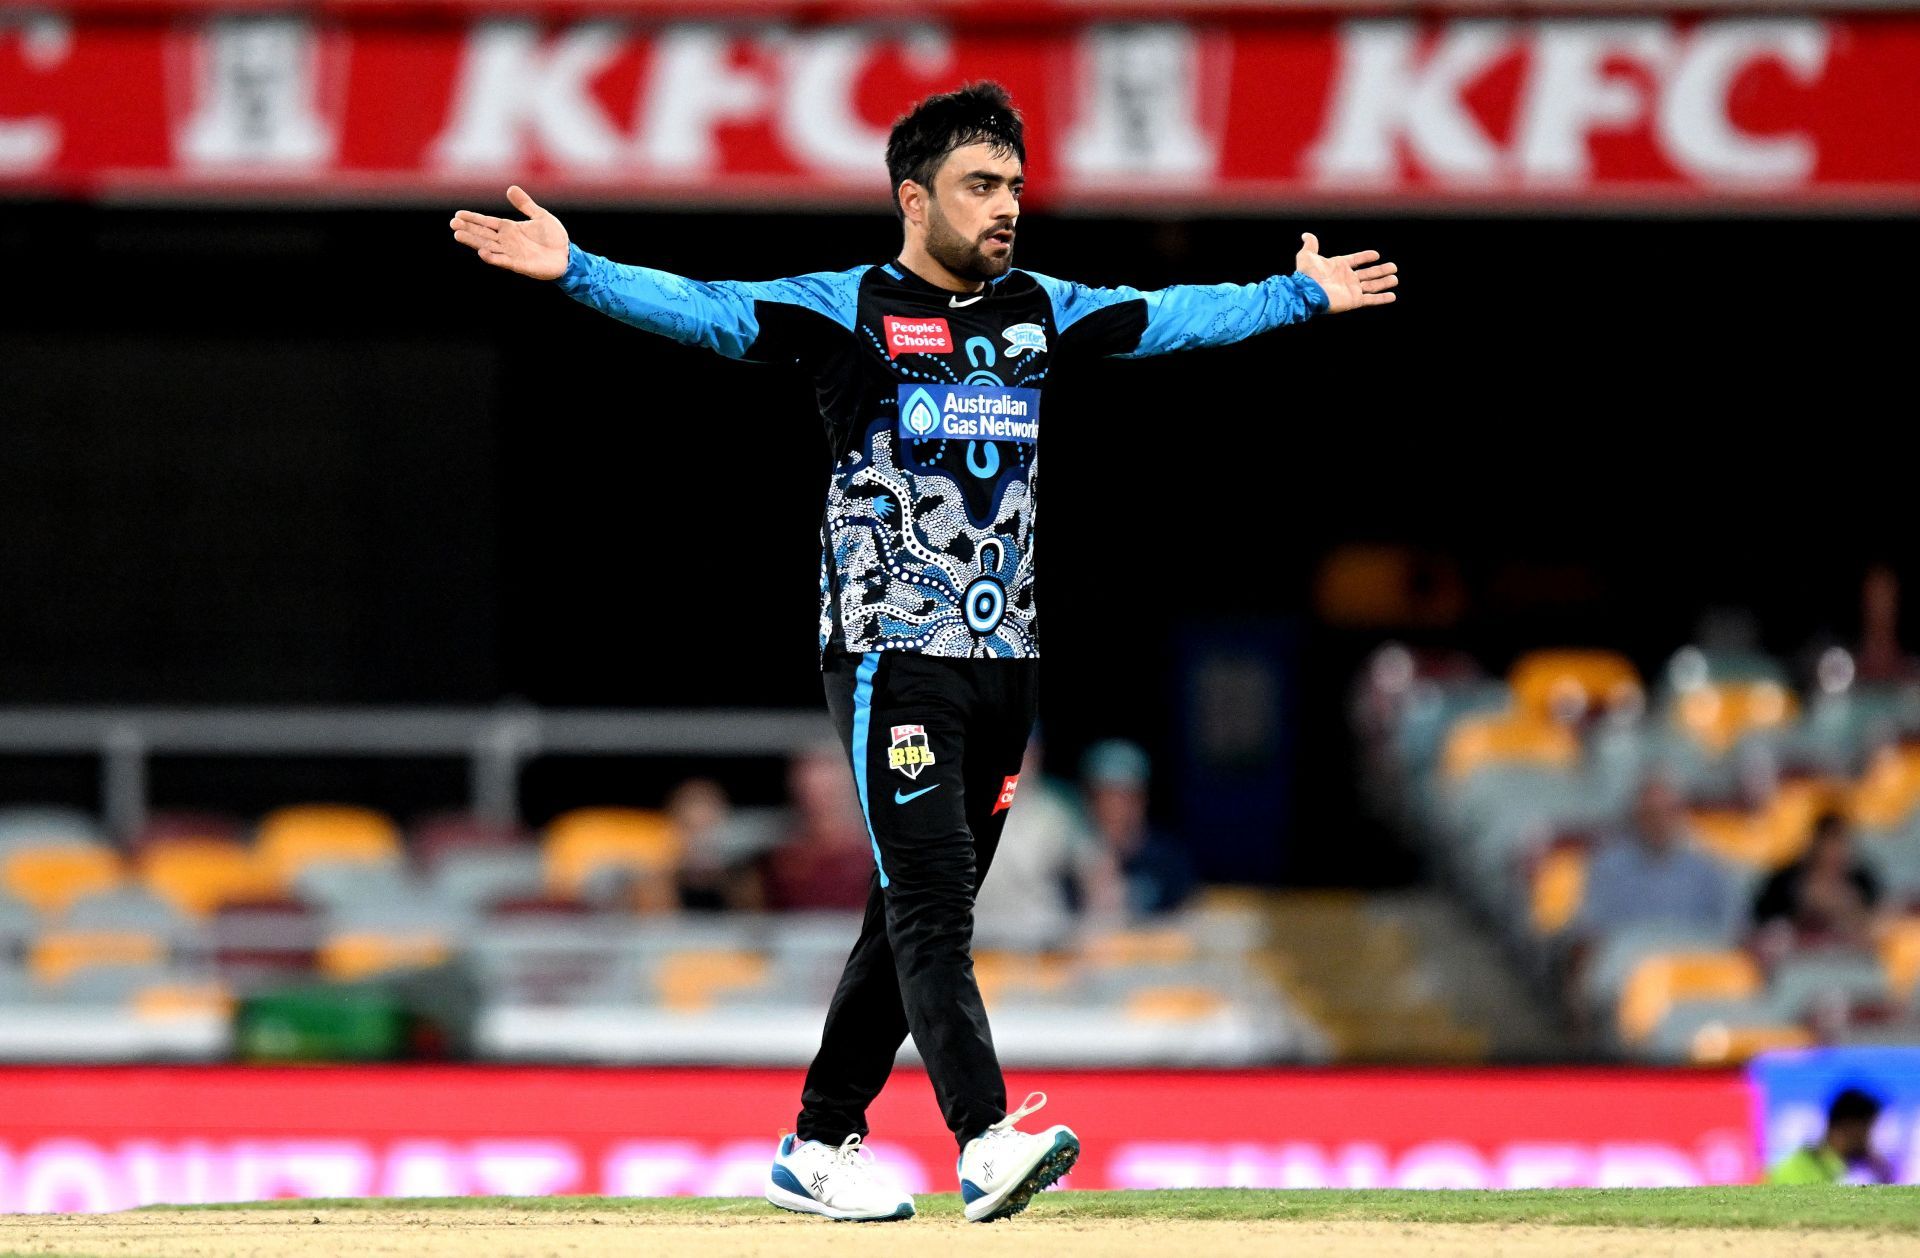 Rashid Khan picked 20 wickets in 11 games at an economy of 6.34 in the BBL season earlier this year